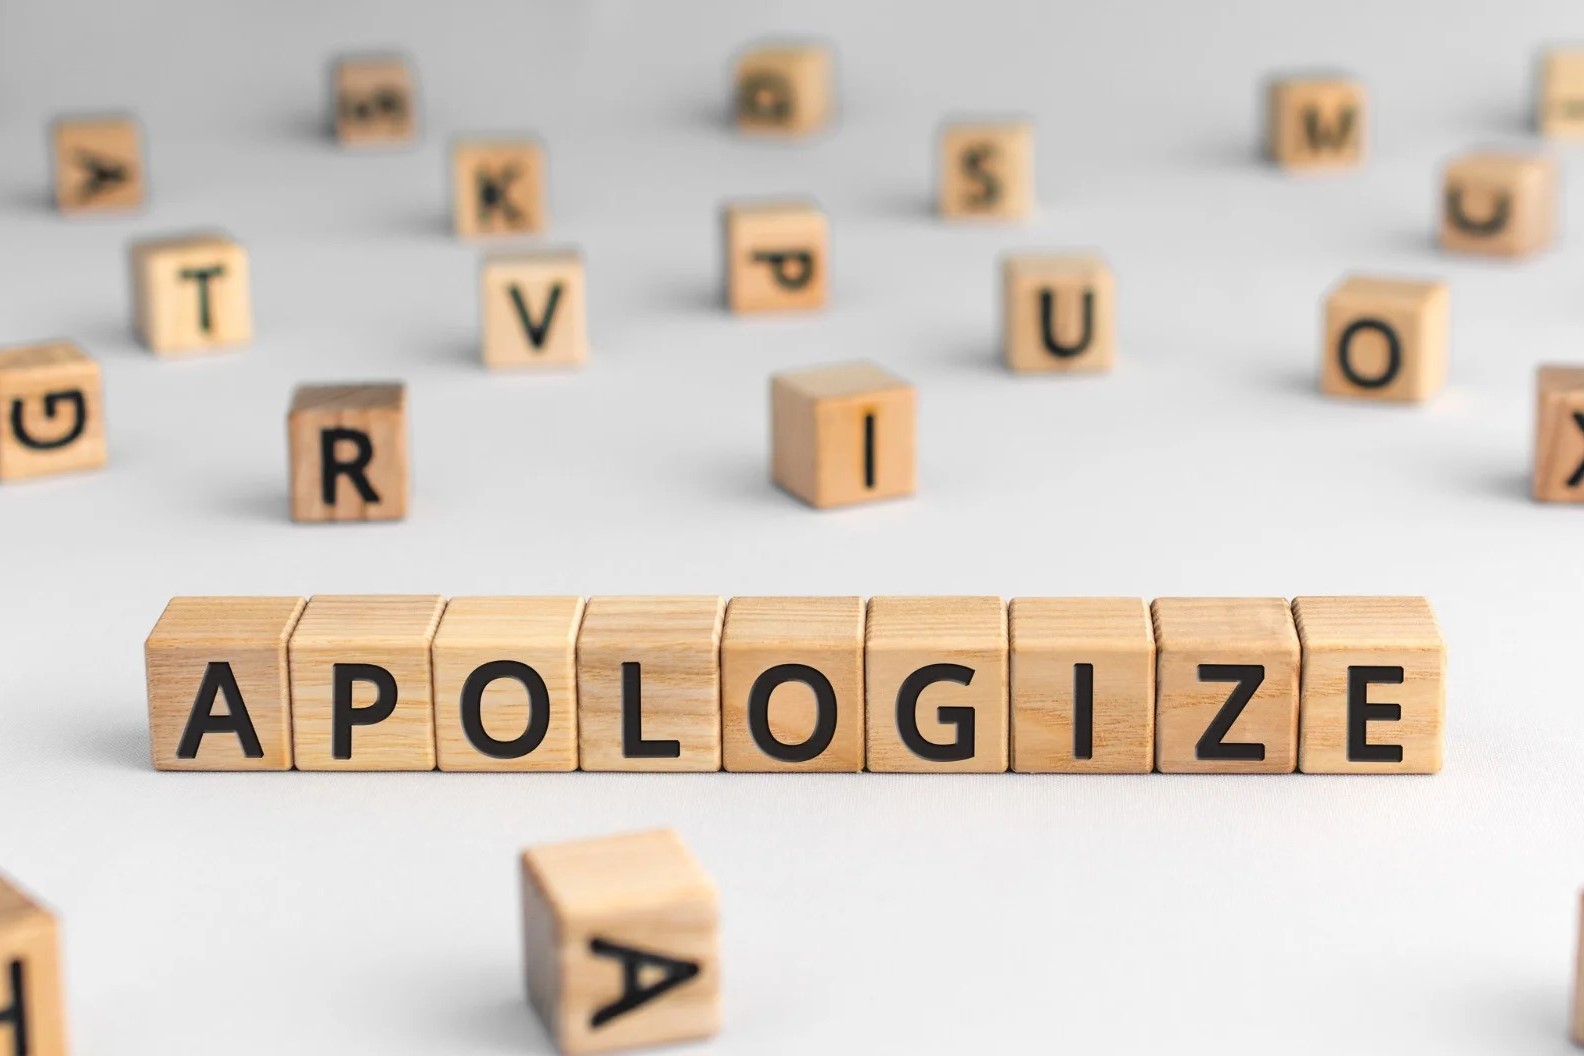 Is ‘No Need To Apologize’ Rude? Find Out Now!